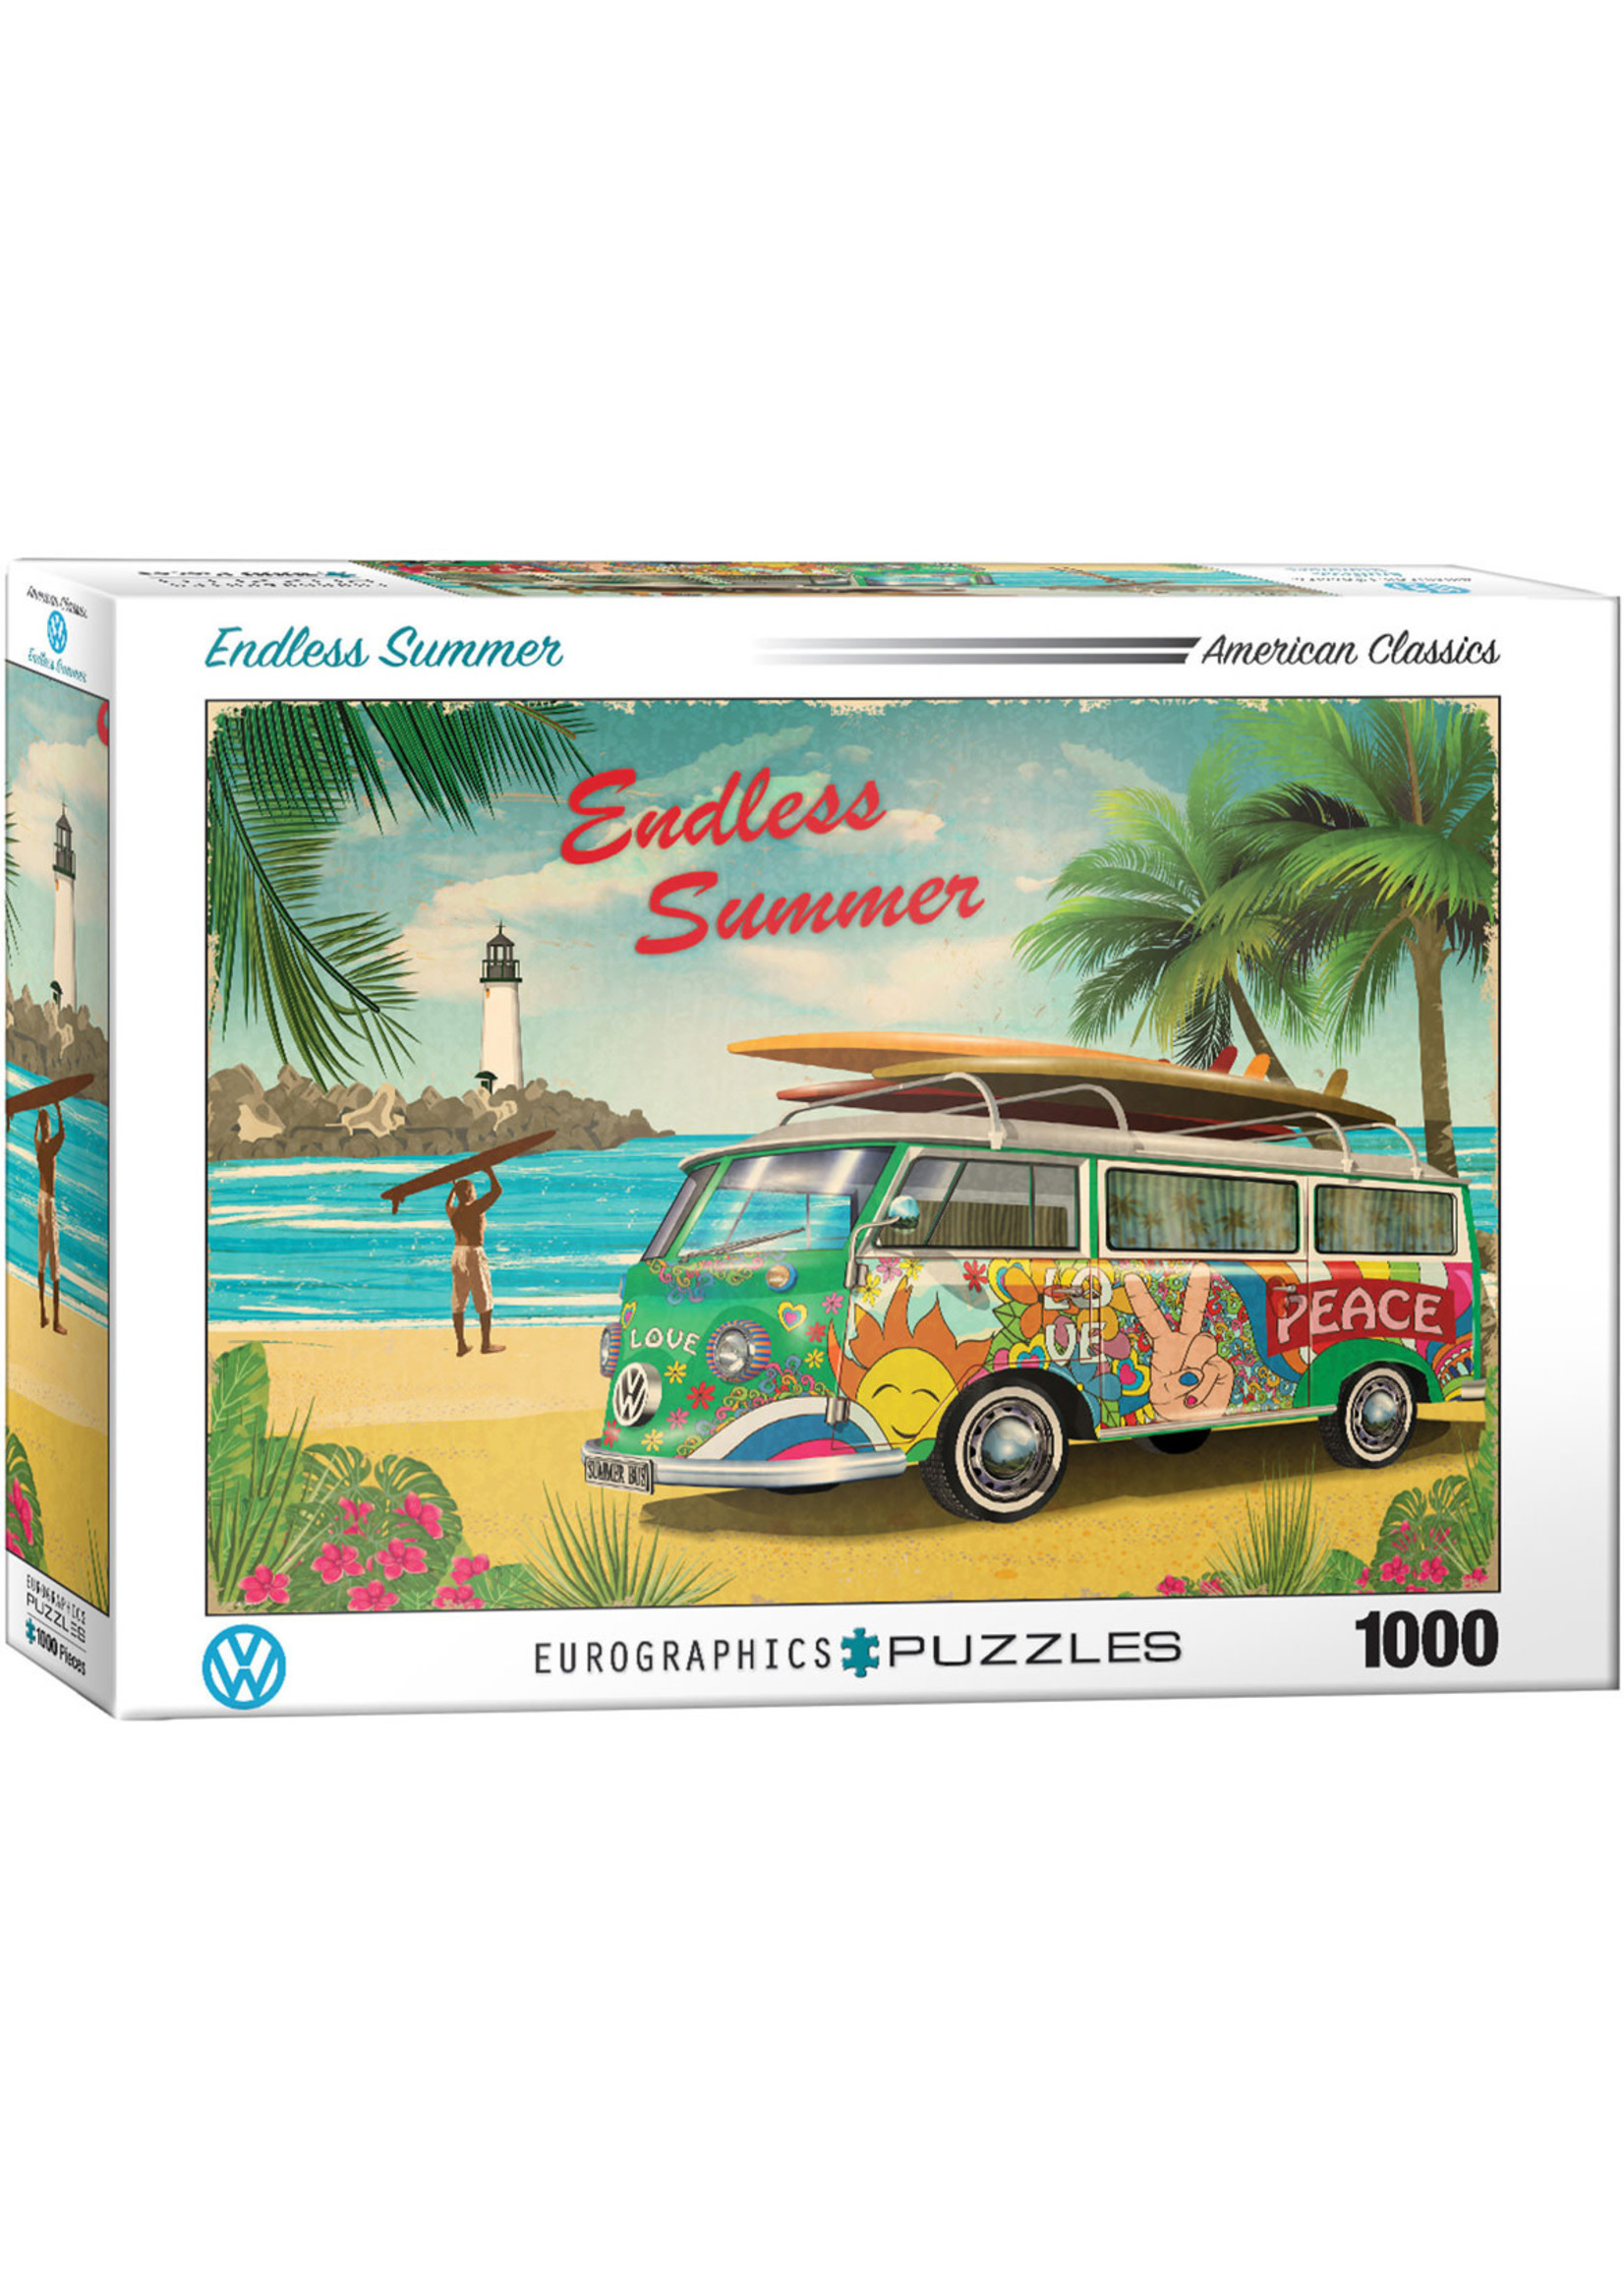 Eurographics "VW Endless Summer" 1000 Piece Puzzle